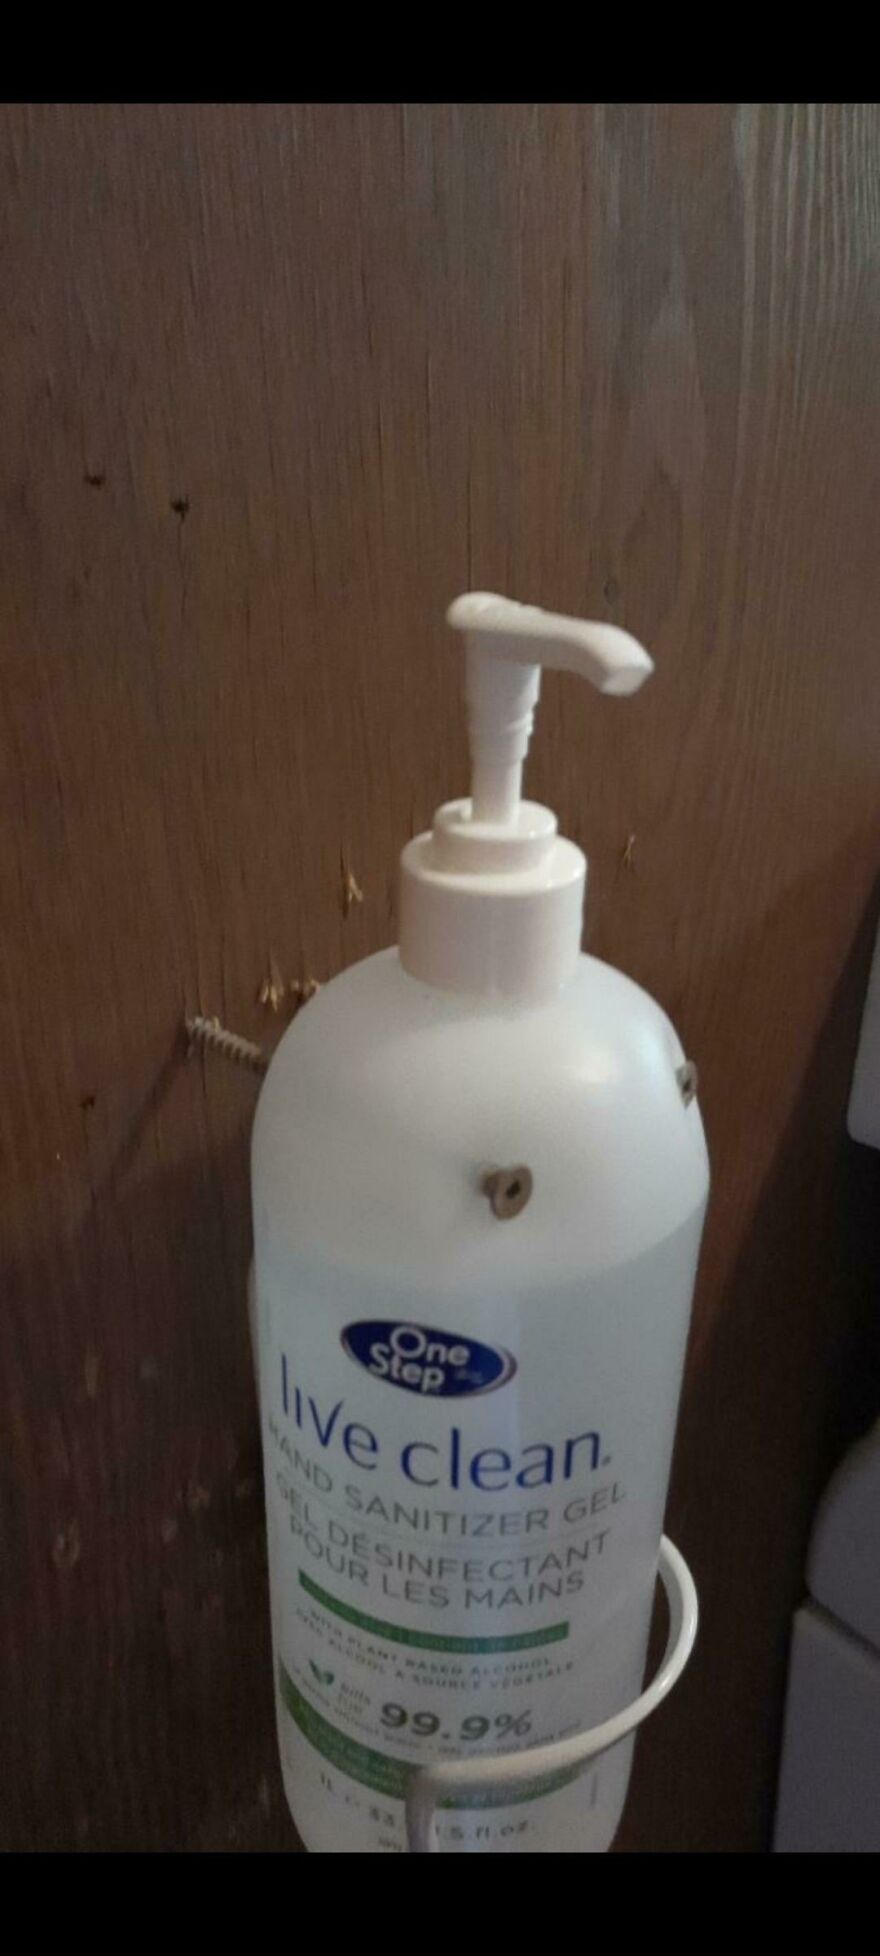 Installed The Hand Sanitizer, Boss